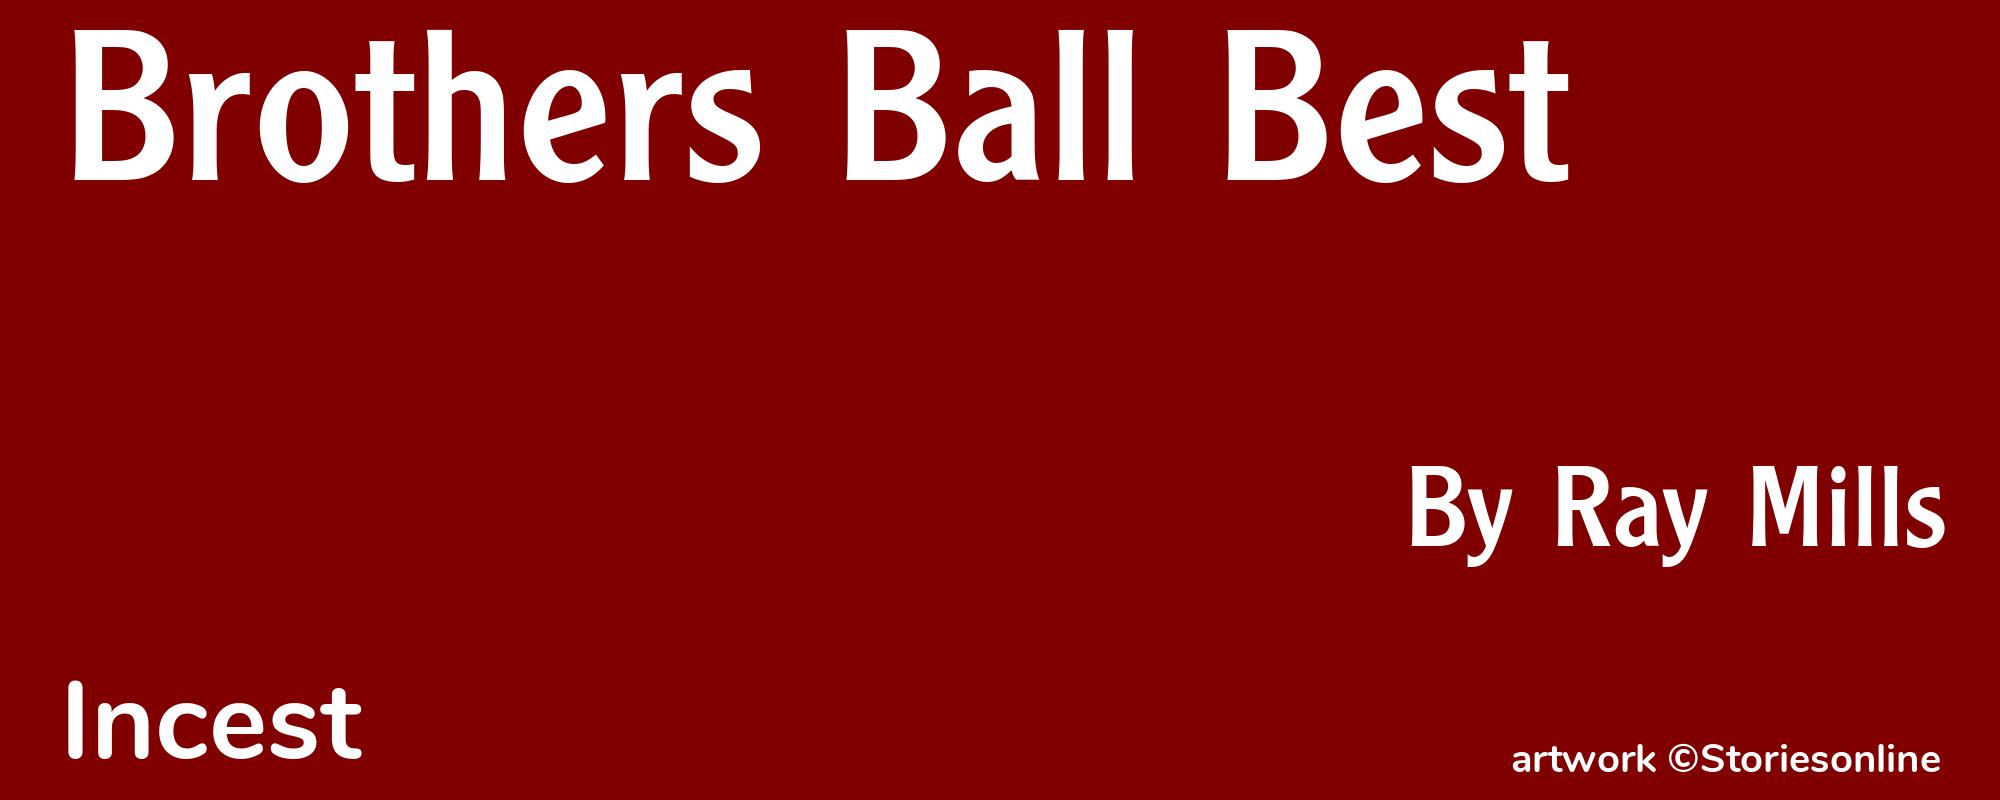 Brothers Ball Best - Cover